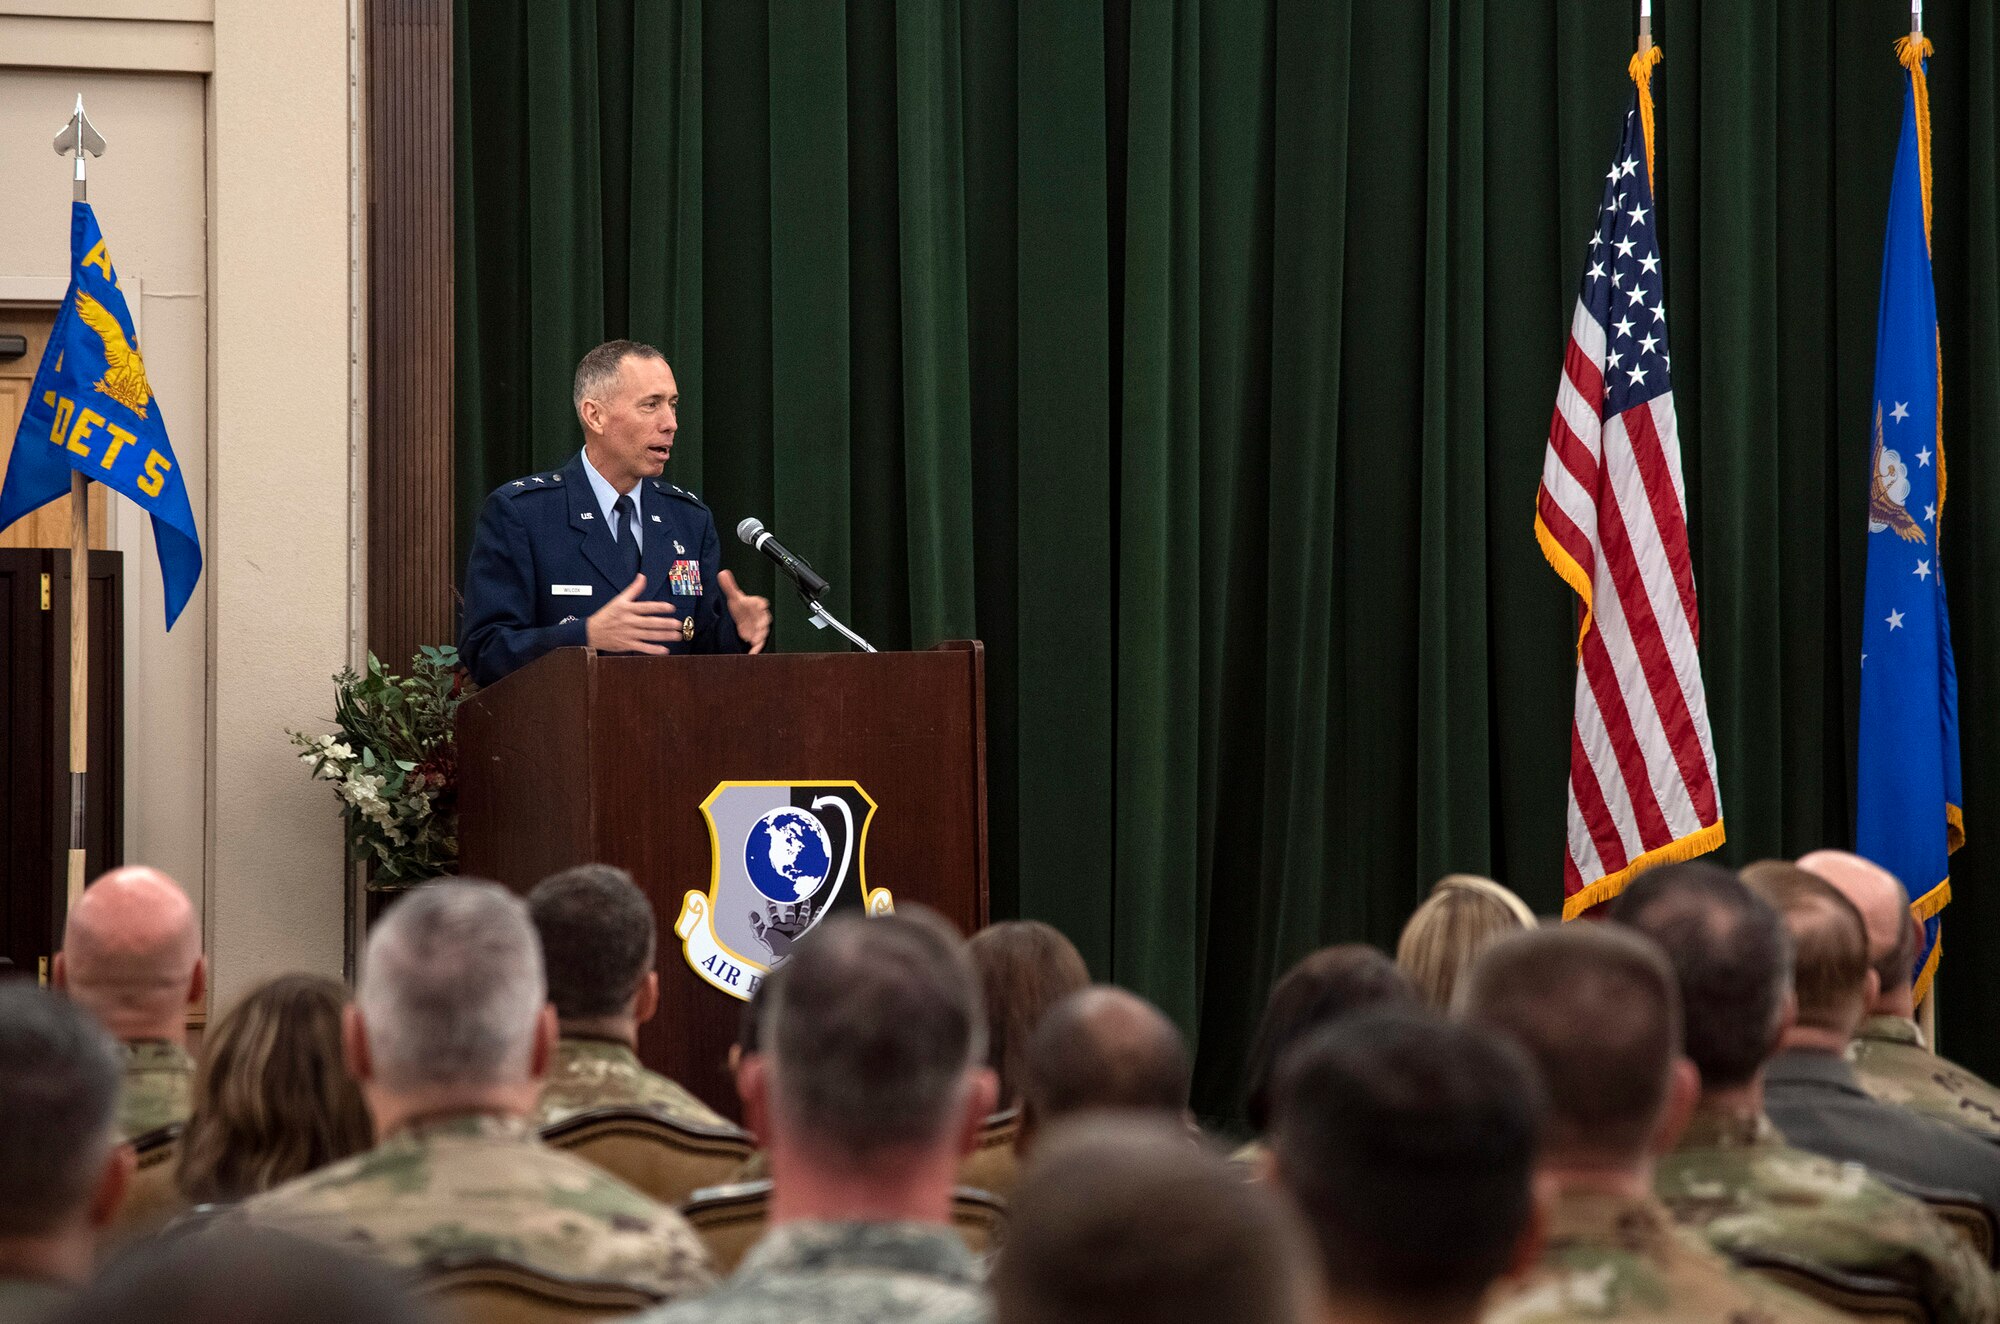 Maj. Gen. Tom Wilcox, commander of the Air Force Installation and Mission Support Center, addresses the audience after taking command July 25 in a ceremony at the Gateway Club on Joint Base San Antonio-Lackland. (U.S. Air Force photo by Johnny Saldivar)